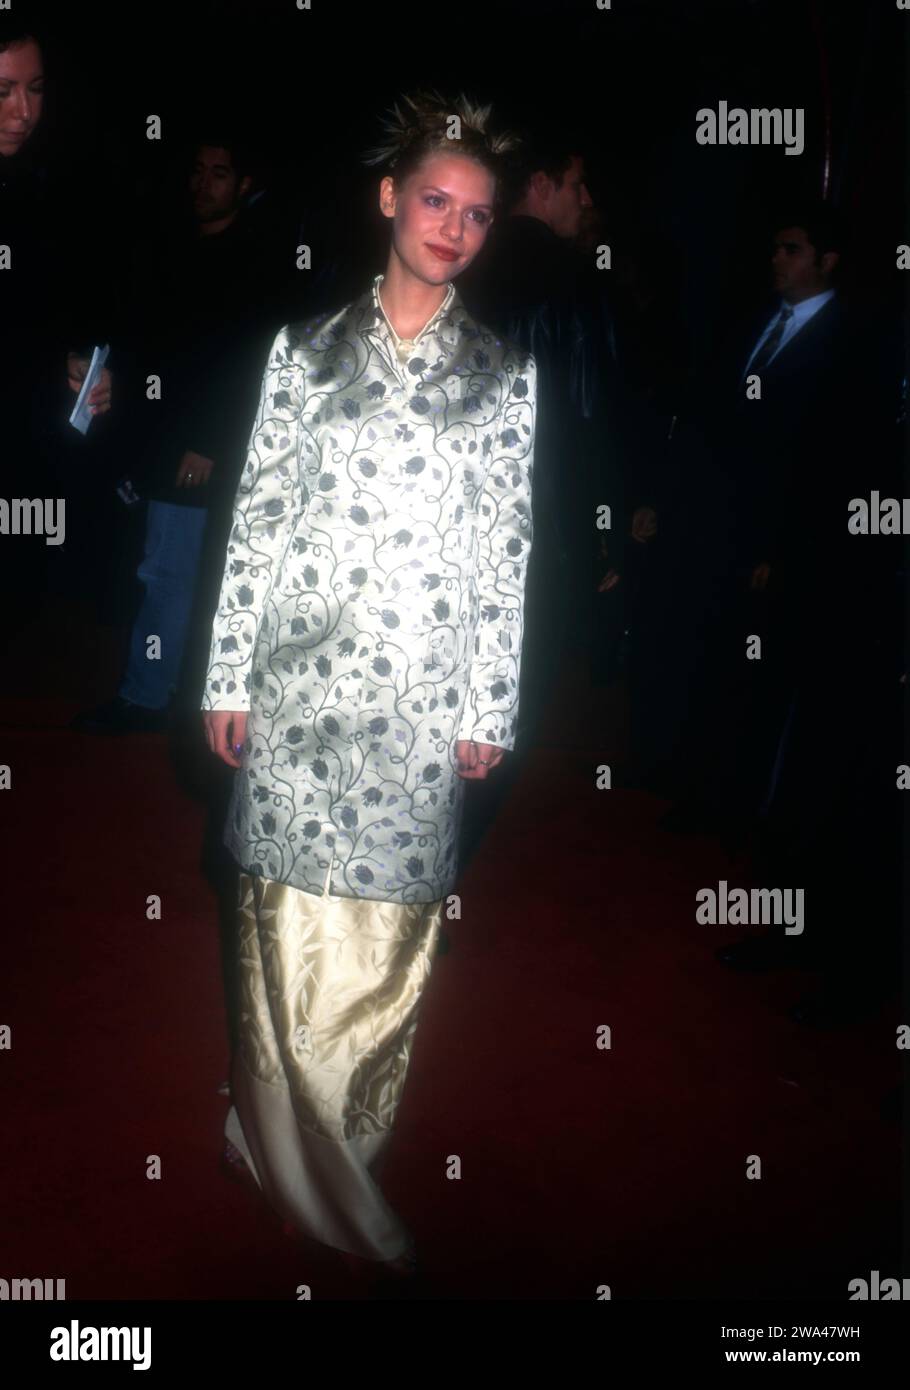 Los Angeles, California, USA 27th October 1996 Actress Claire Danes, wearing Prada attends 20th Century FoxÕs ÔRomeo & JulietÕ Premiere at Mann Chinese Theatre on October 27, 1996 in Los Angeles, California, USA. Photo by Barry King/Alamy Stock Photo Stock Photo